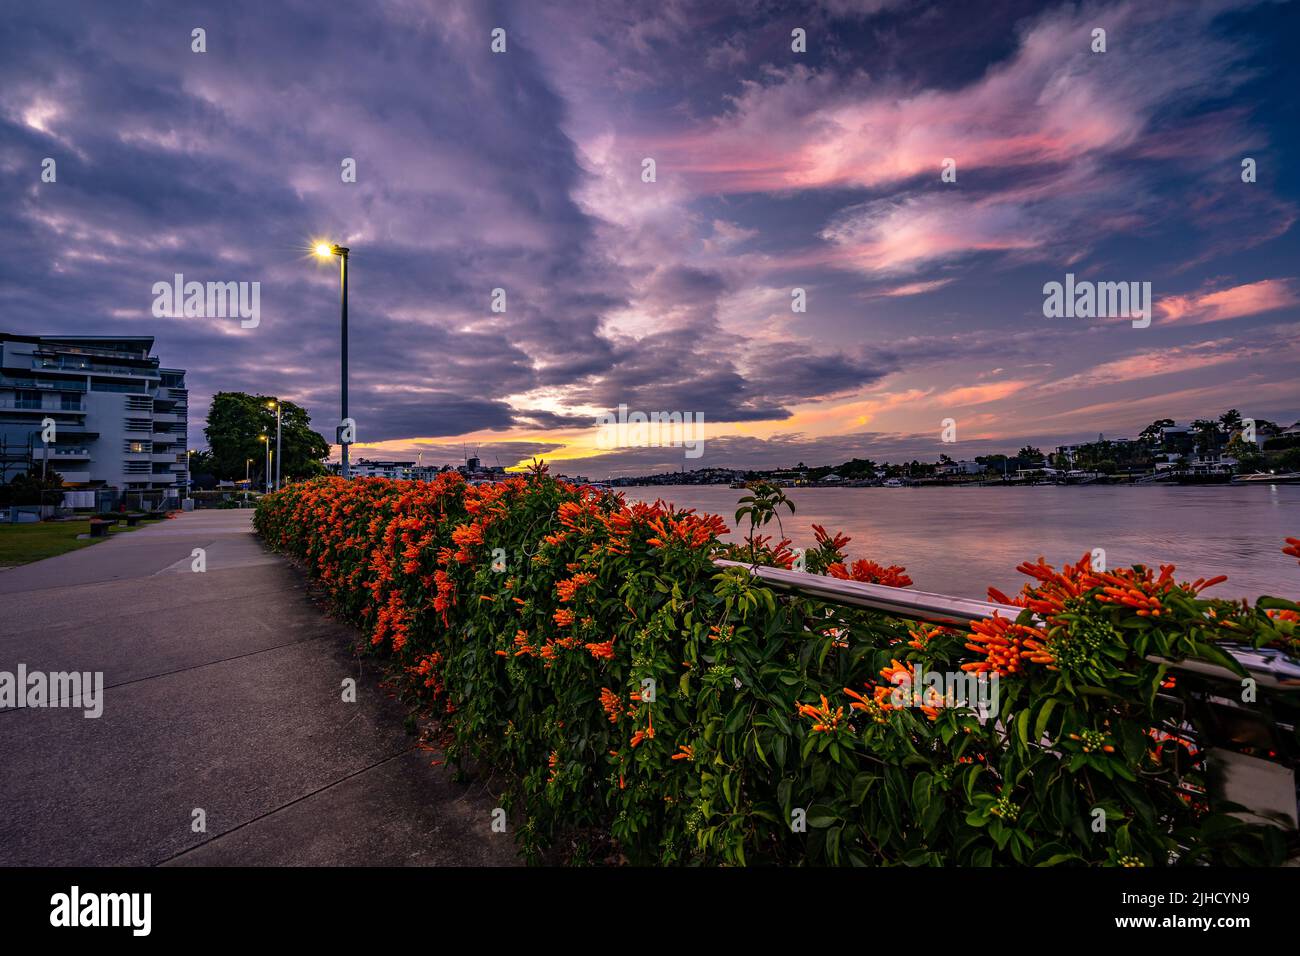 Brisbane, Australia - River walk along the Brisbane river with beautiful sunset in the background Stock Photo